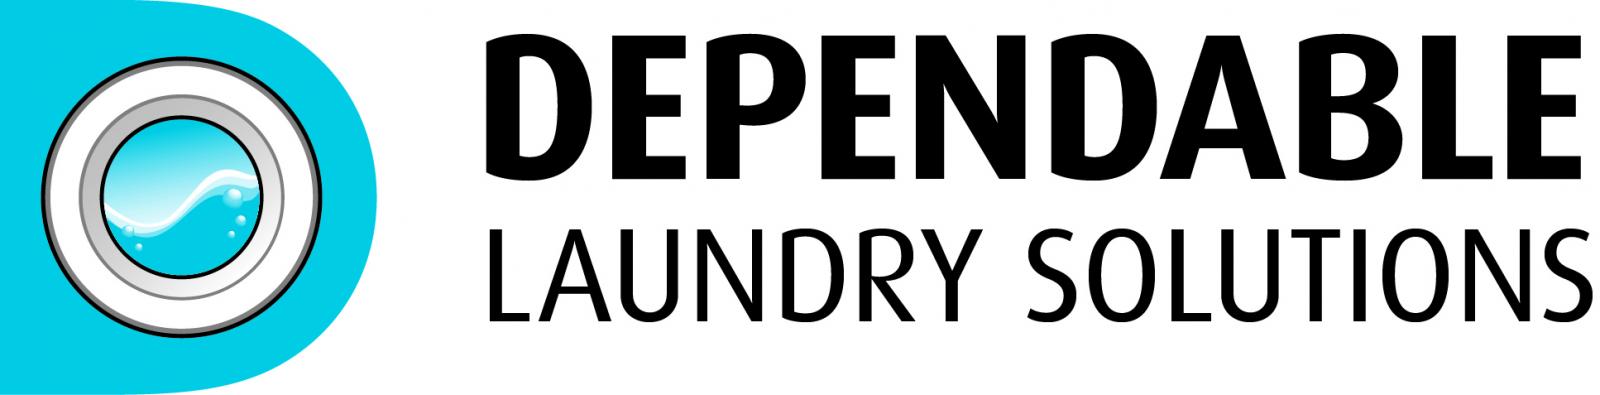 Dependable Laundry Solutions